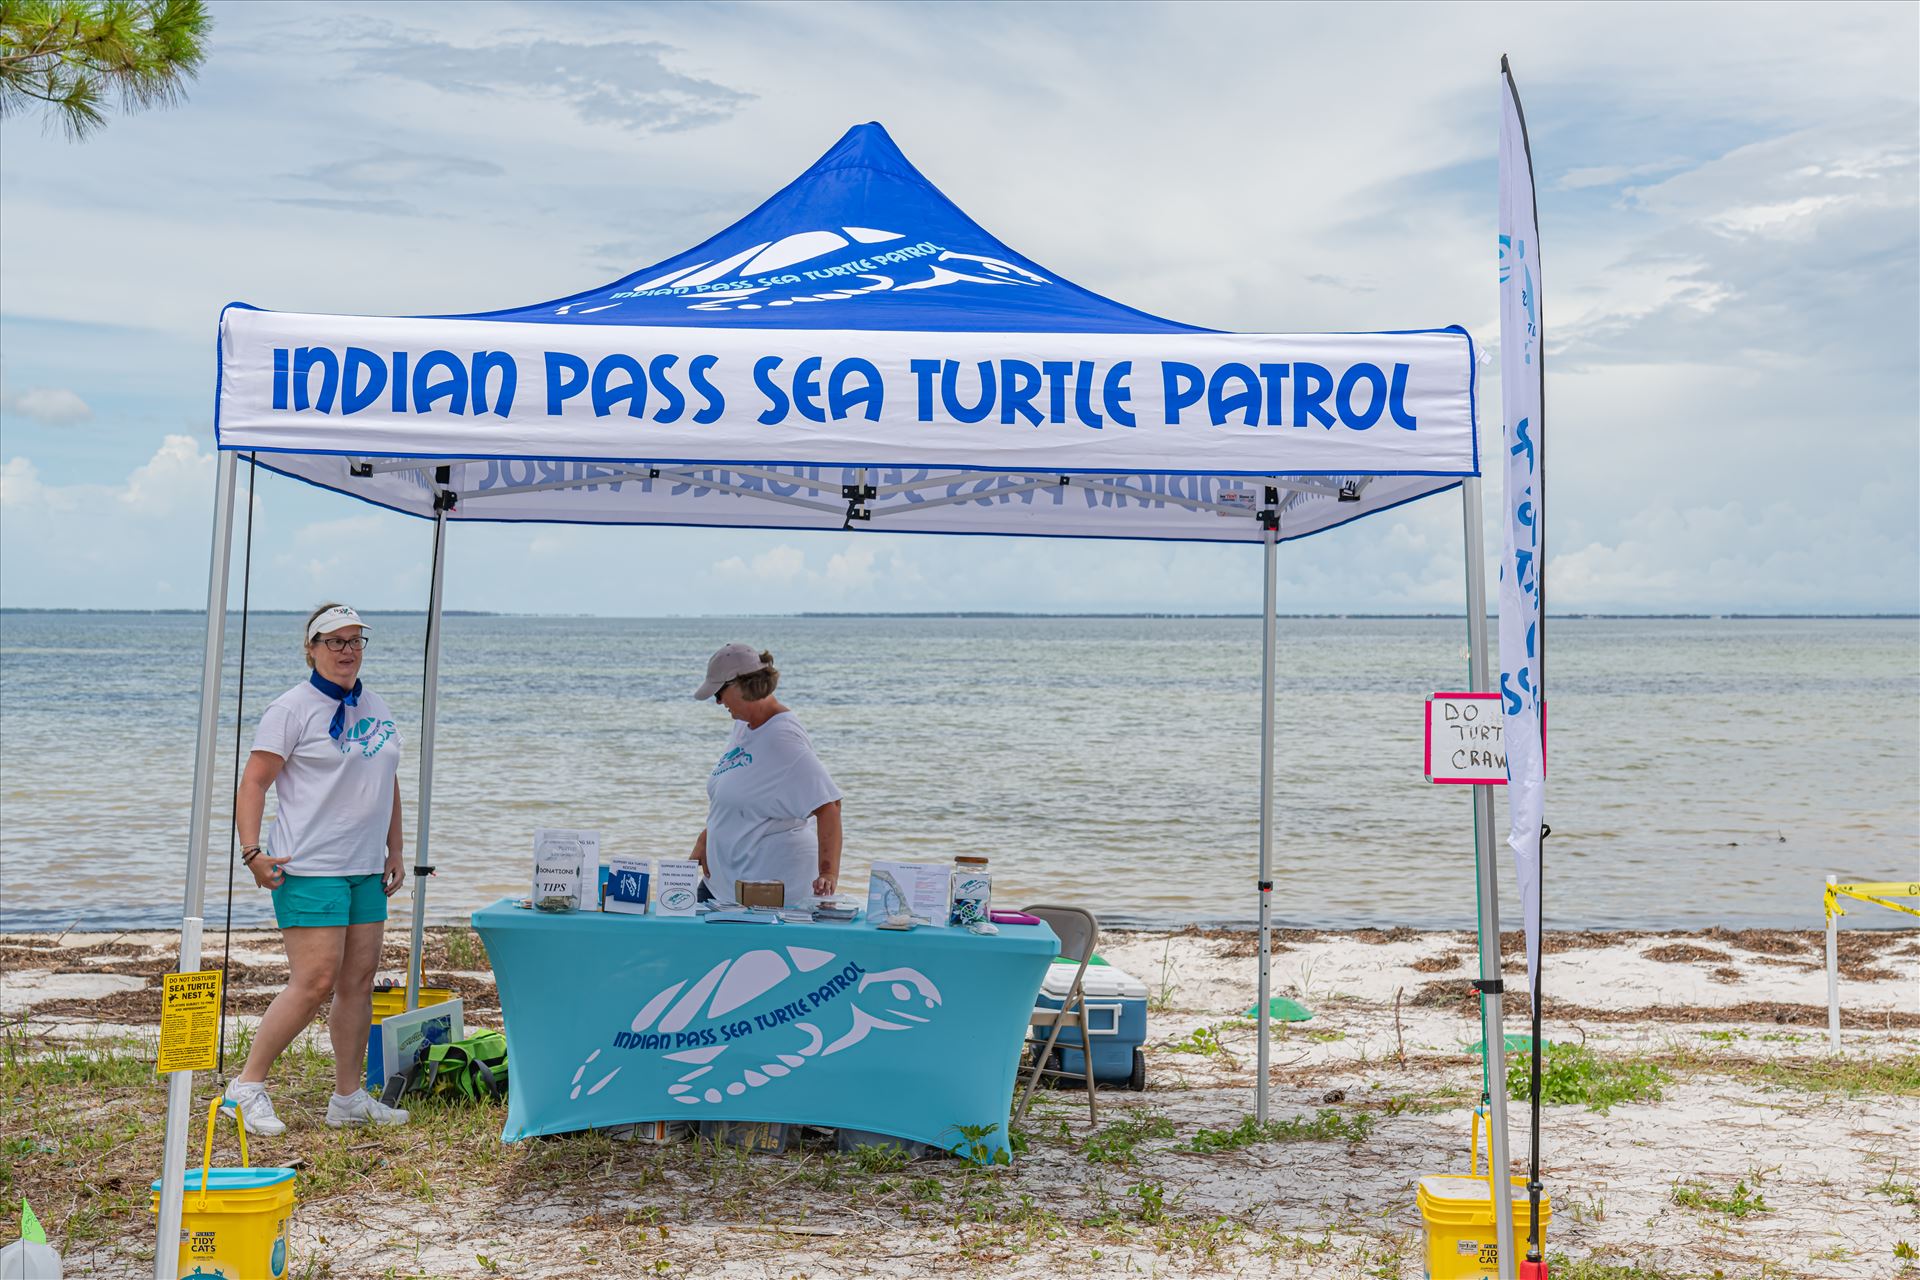 Forgotten Coast Sea Turtle Festival June 30th, 2019  Port St. Joe, Florida at George Gore Park by Terry Kelly Photography